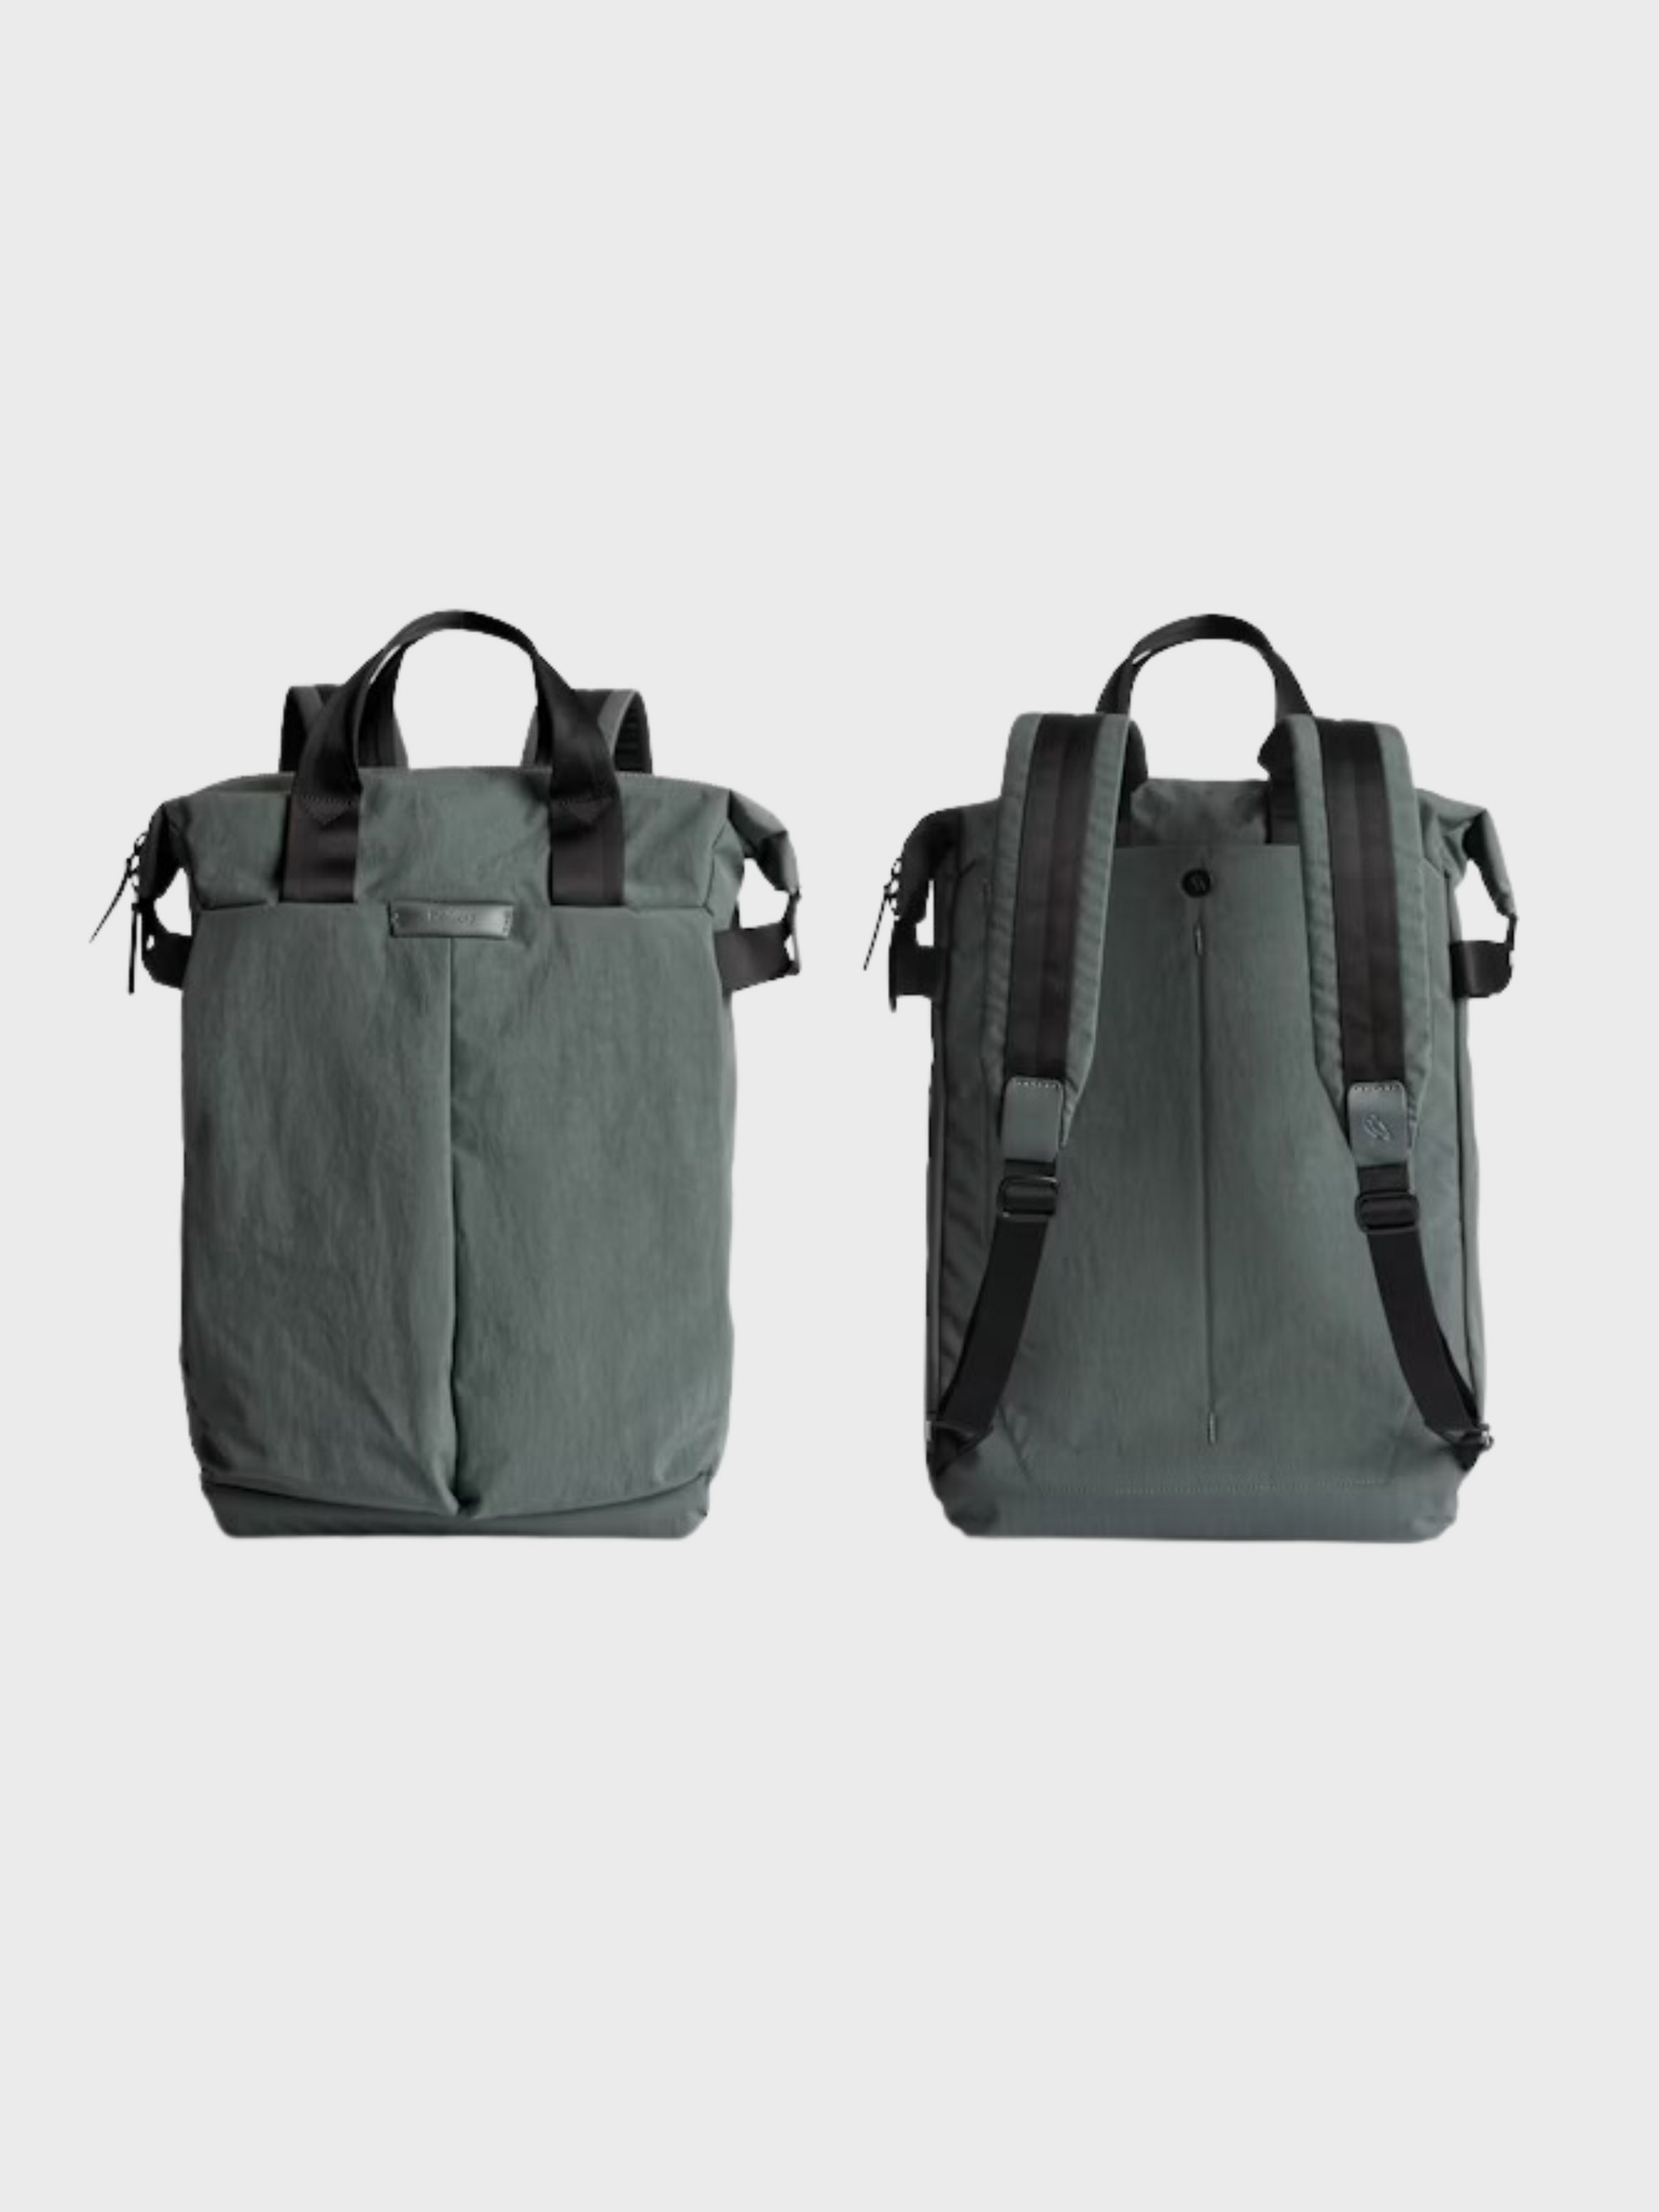 Bellroy Tokyo Totepack Everglade SS24-Men's Bags-Brooklyn-Vancouver-Yaletown-Canada